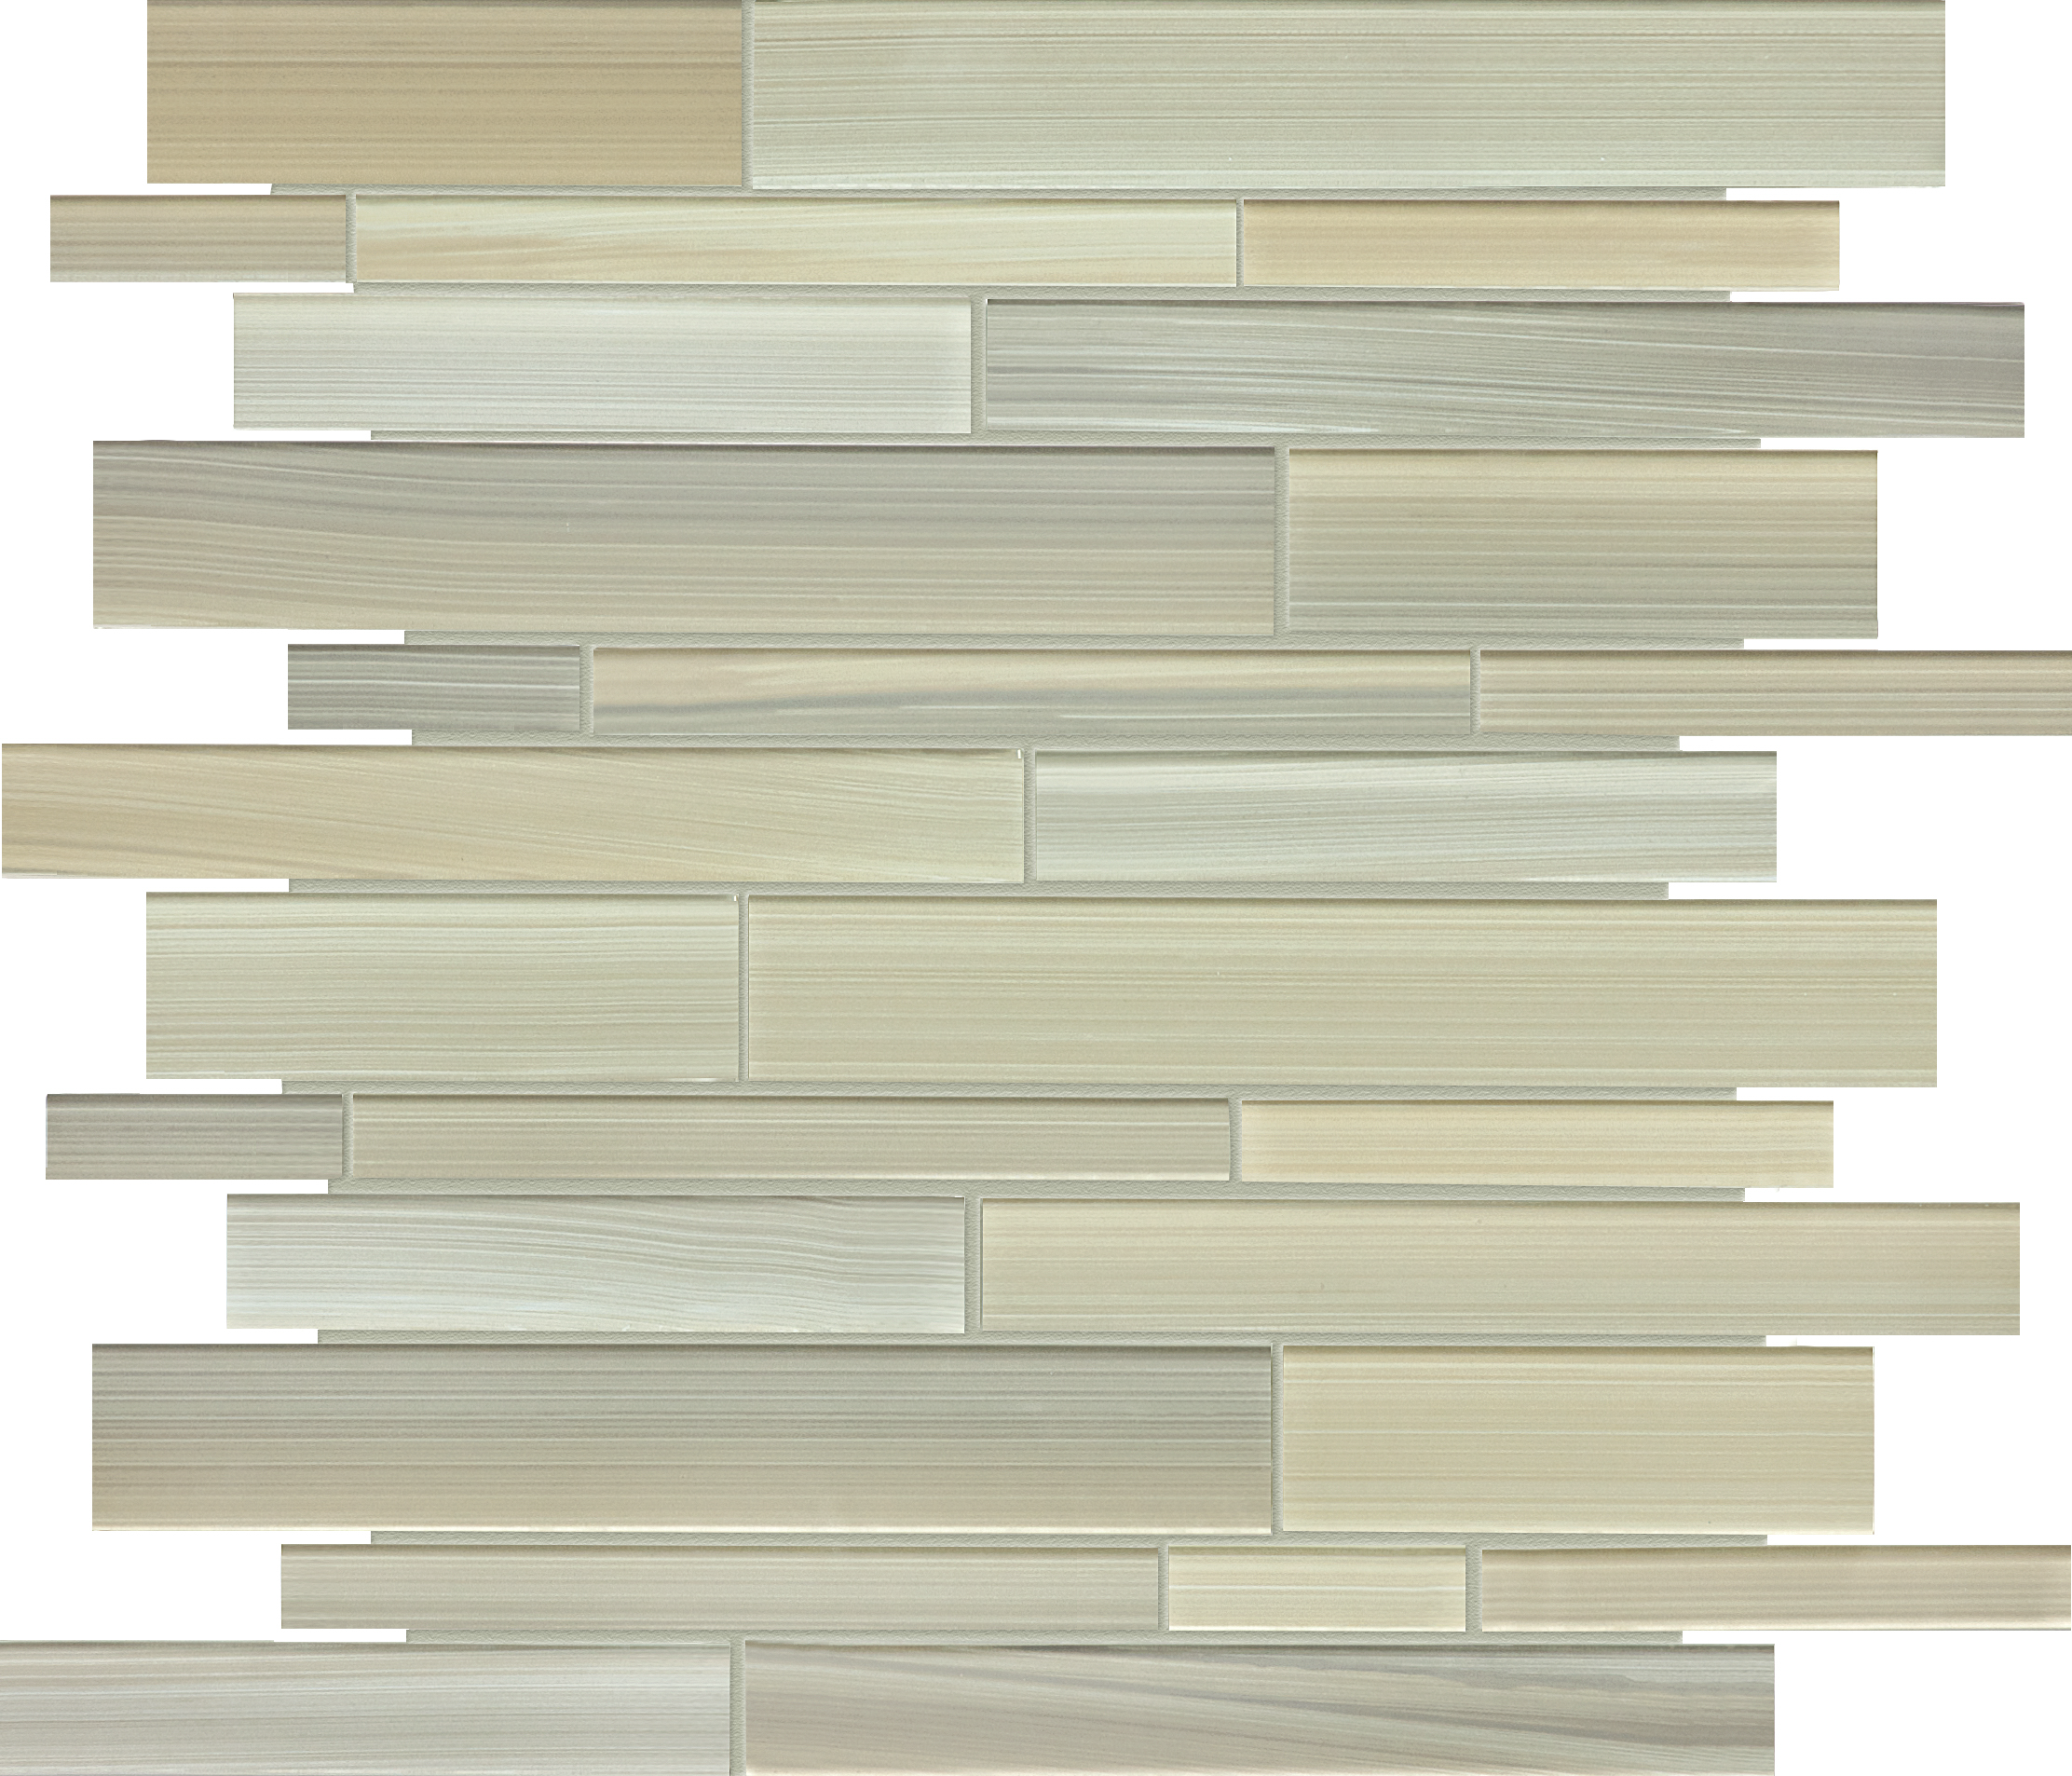 plantation random strip pattern fused glass mosaic from fusion anatolia collection distributed by surface group international glossy finish rounded edge mesh shape